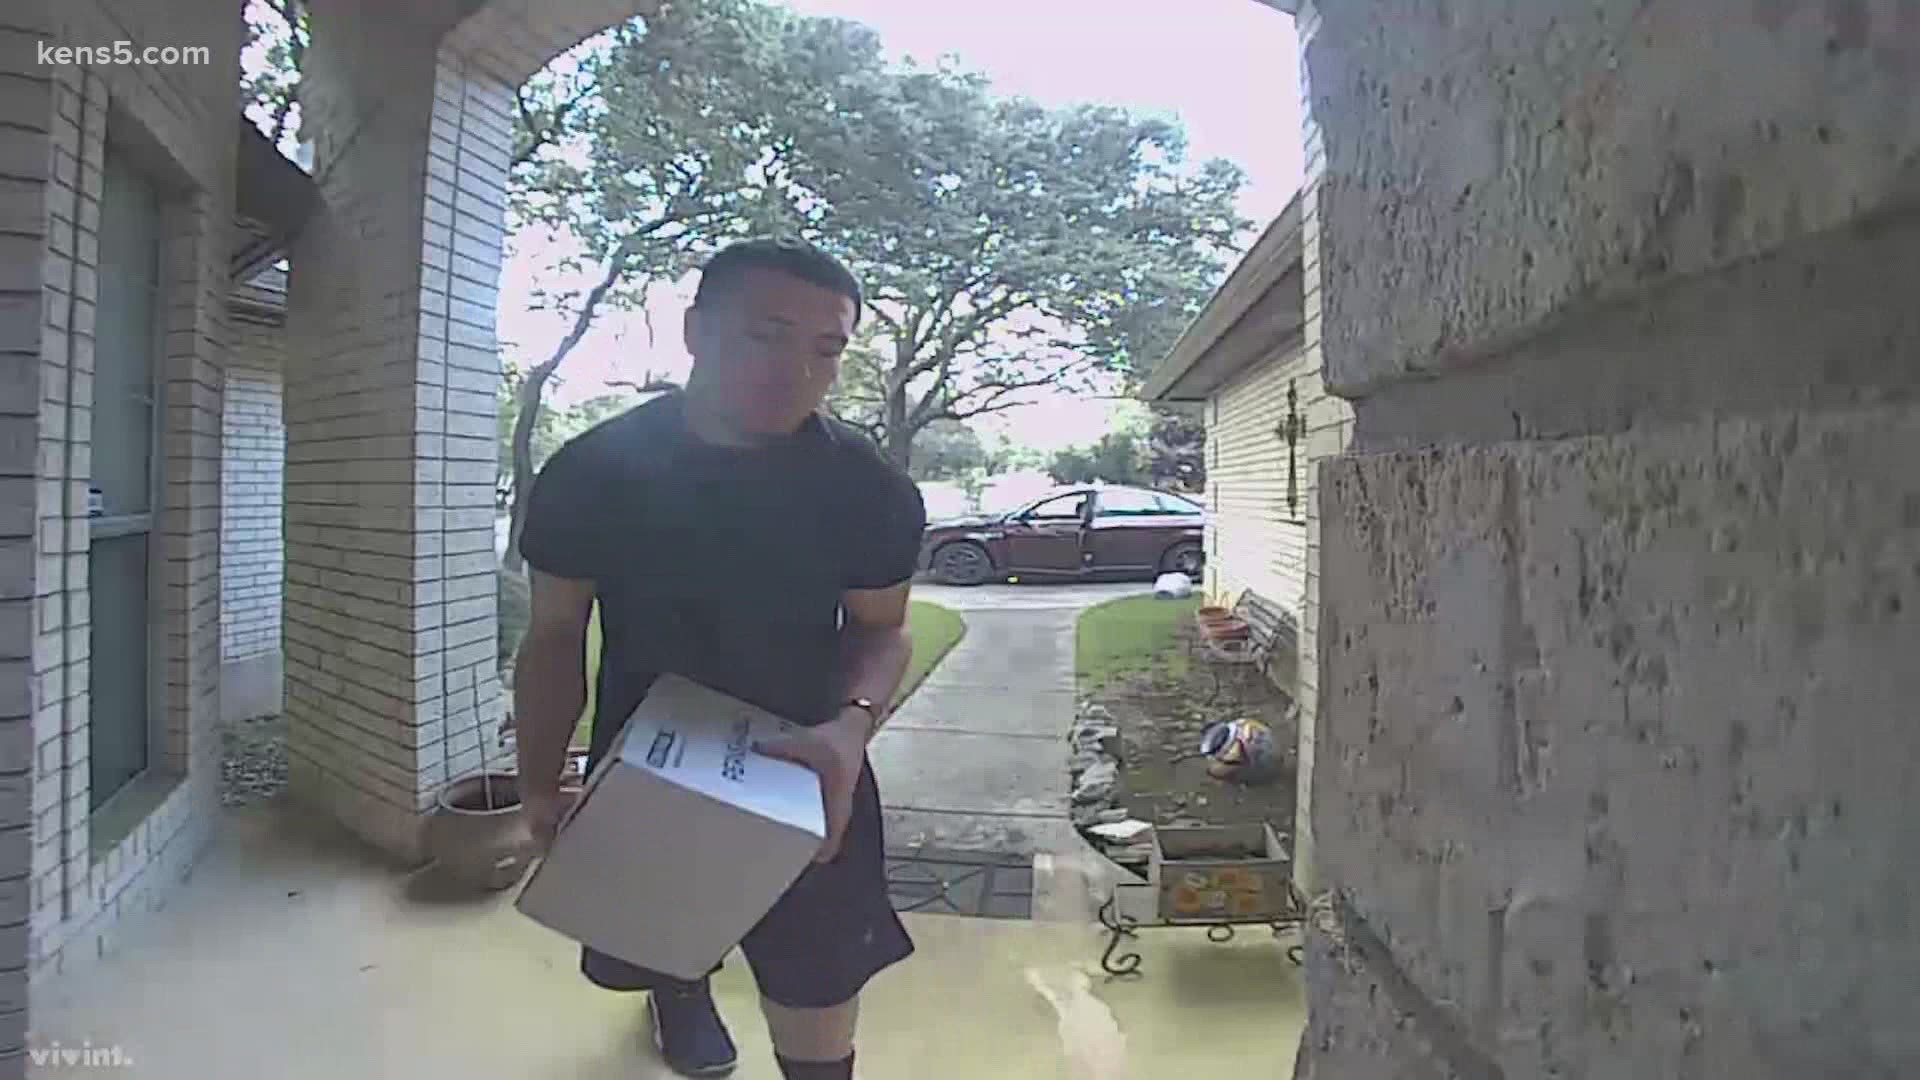 The porch pirate made off with the victim's insulin.